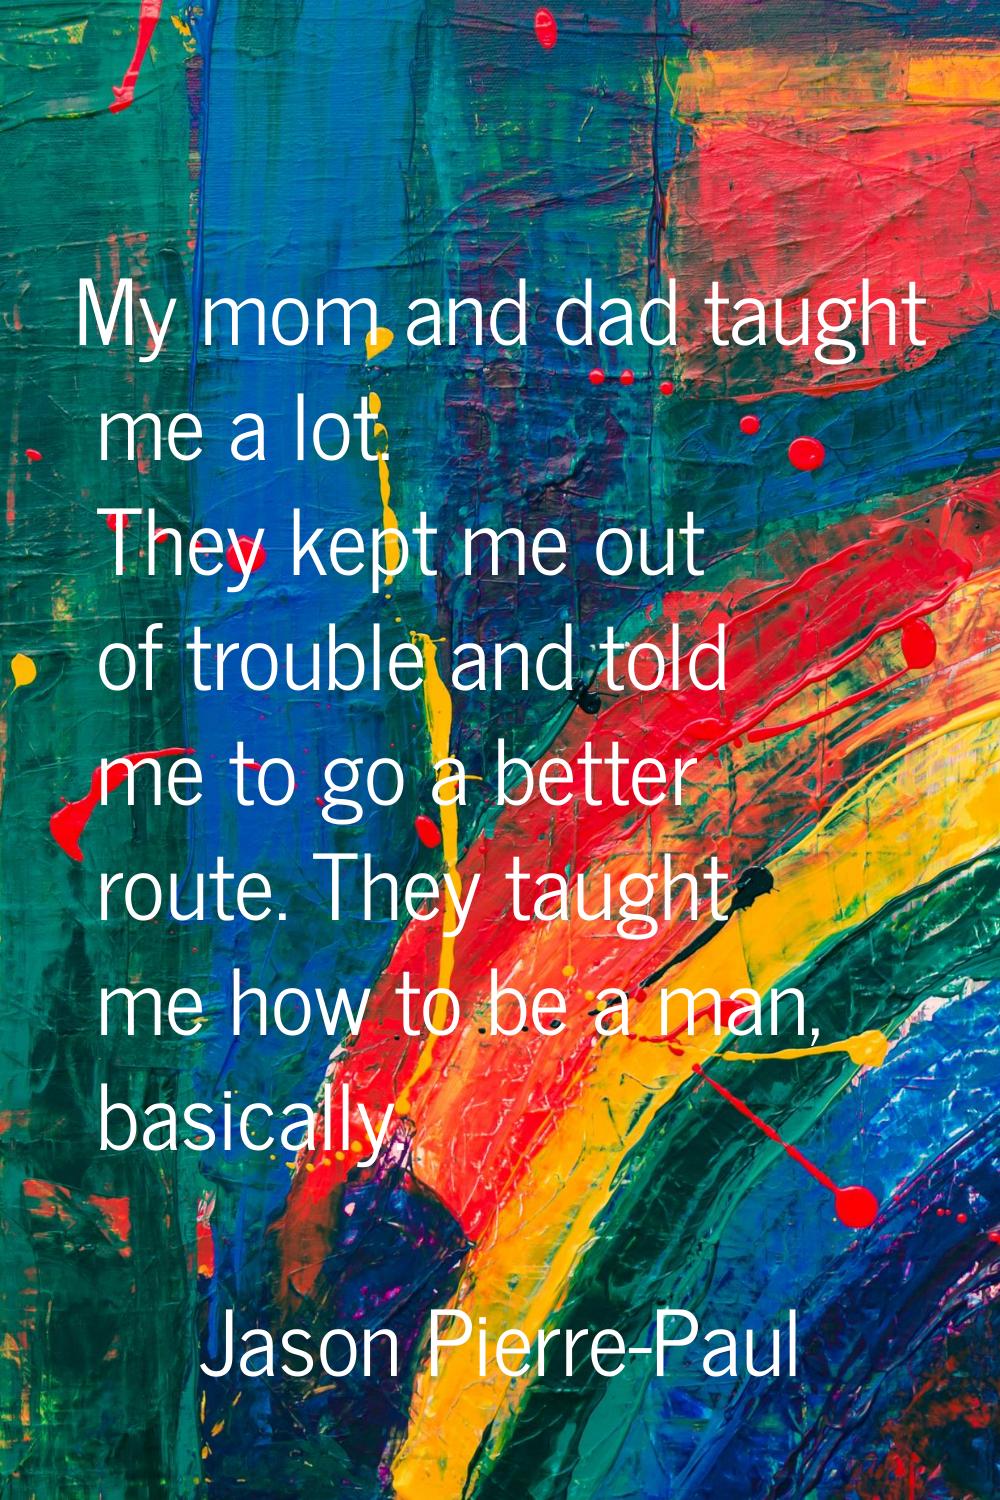 My mom and dad taught me a lot. They kept me out of trouble and told me to go a better route. They 